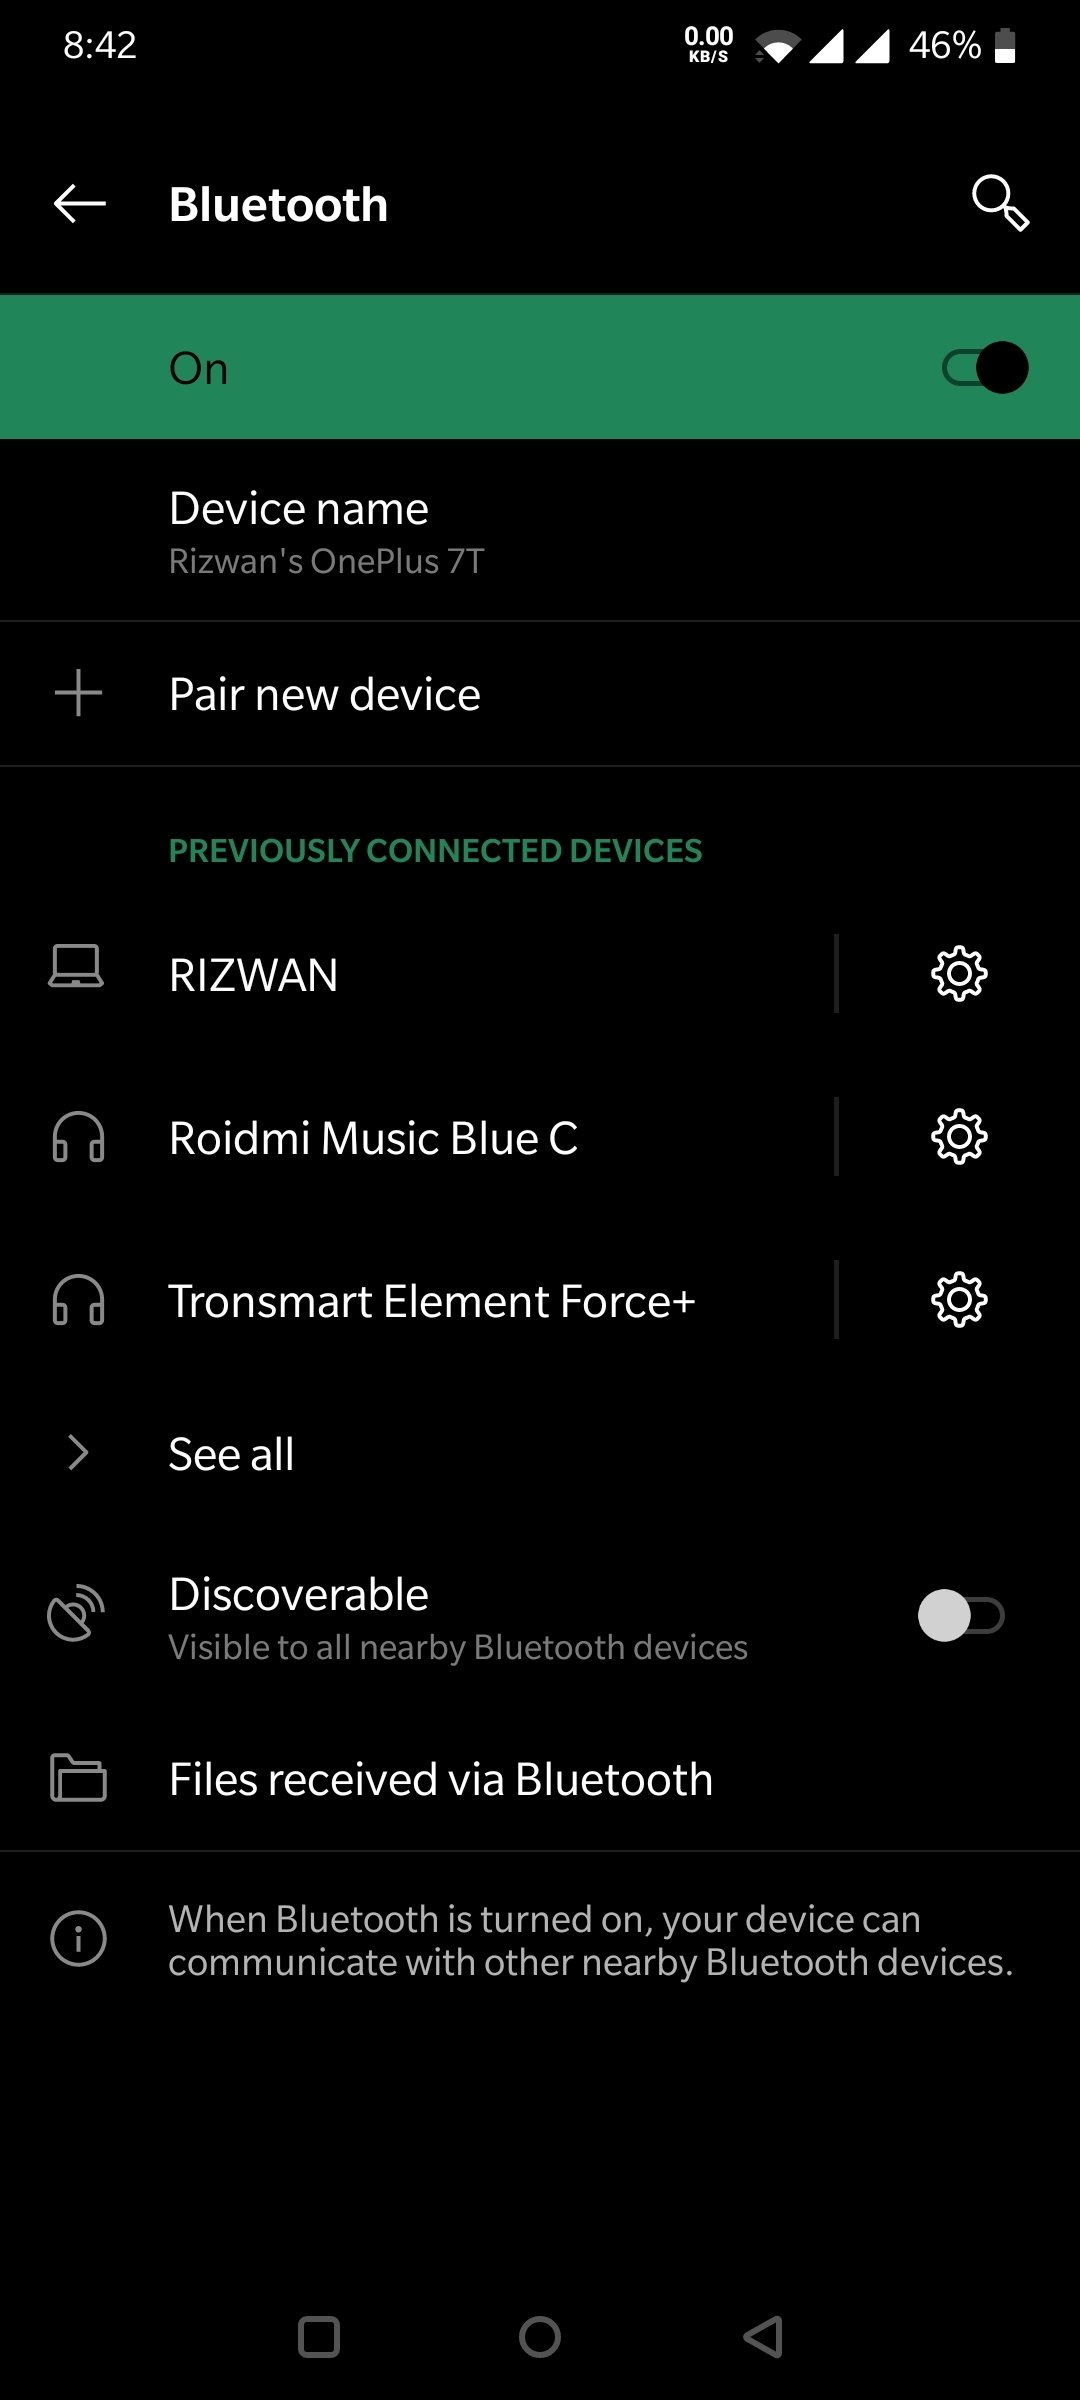 How to manage Bluetooth settings on Android 10